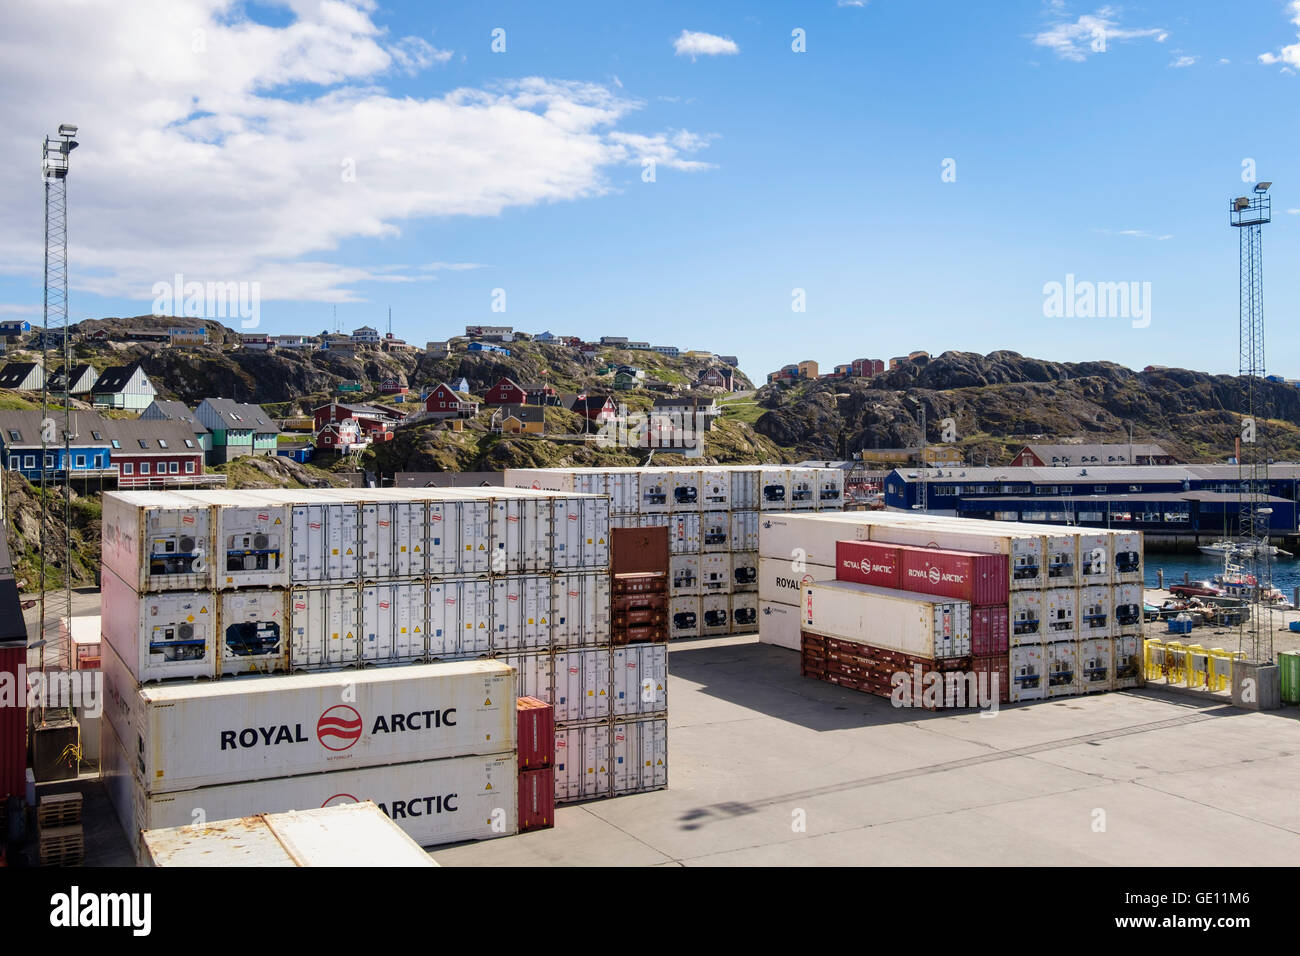 Royal Arctic Line shipping containers mainly containing fish for export market on quay in port. Sisimiut Qeqqata West Greenland. Stock Photo